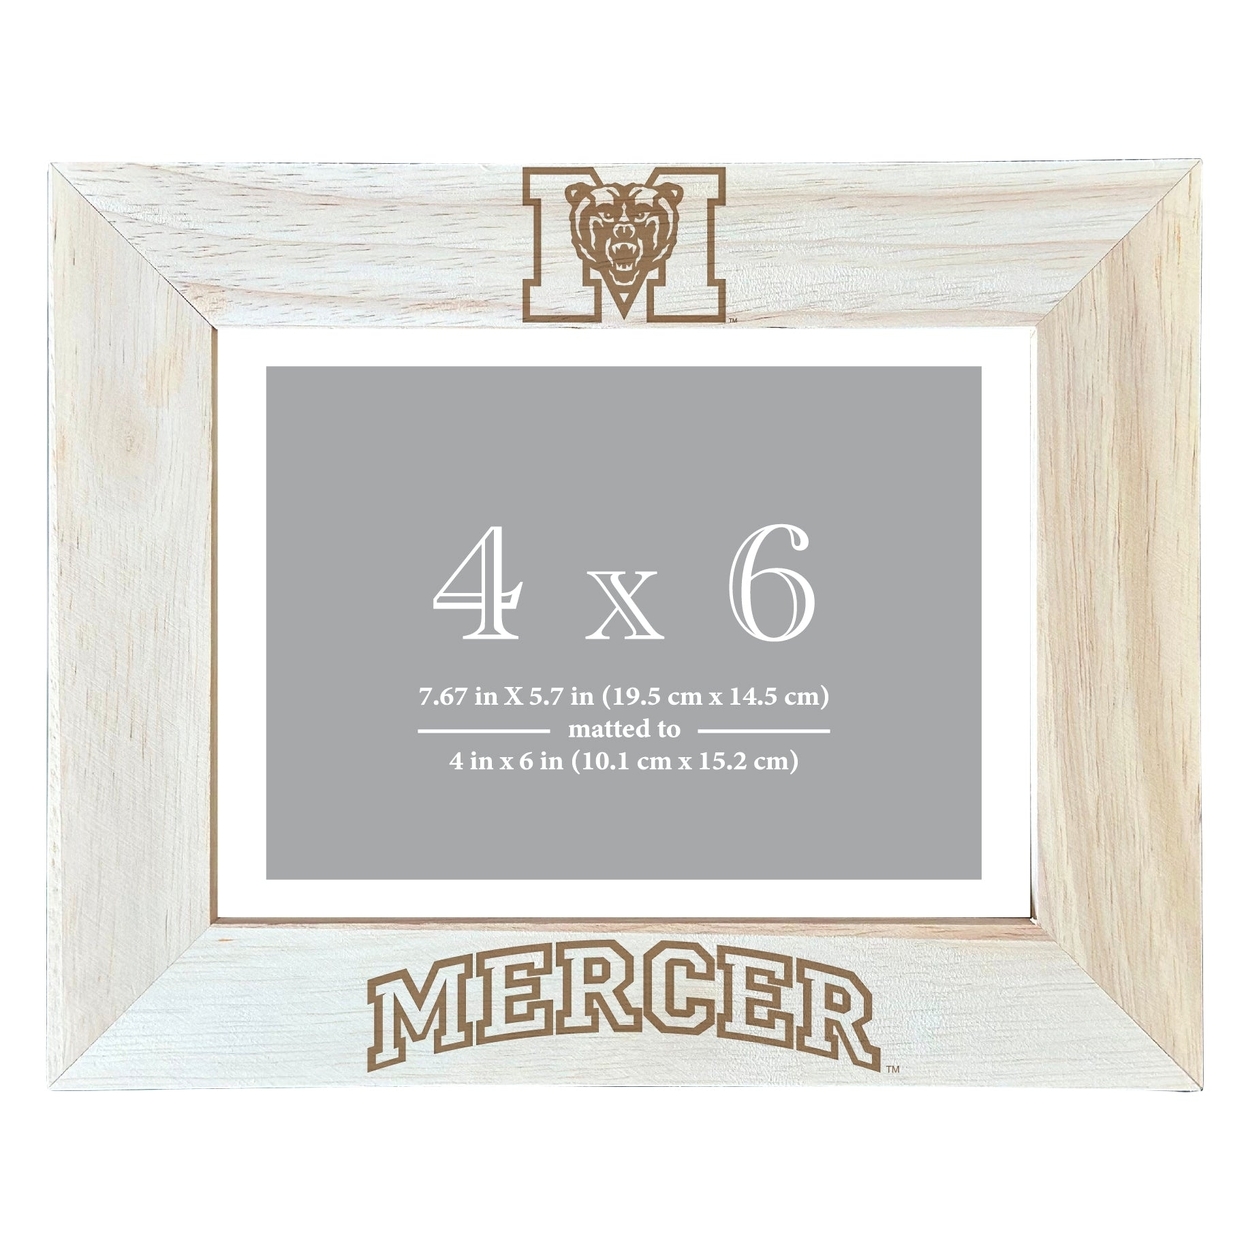 Mercer University Wooden Photo Frame Matted To 4 X 6 Inch - Etched